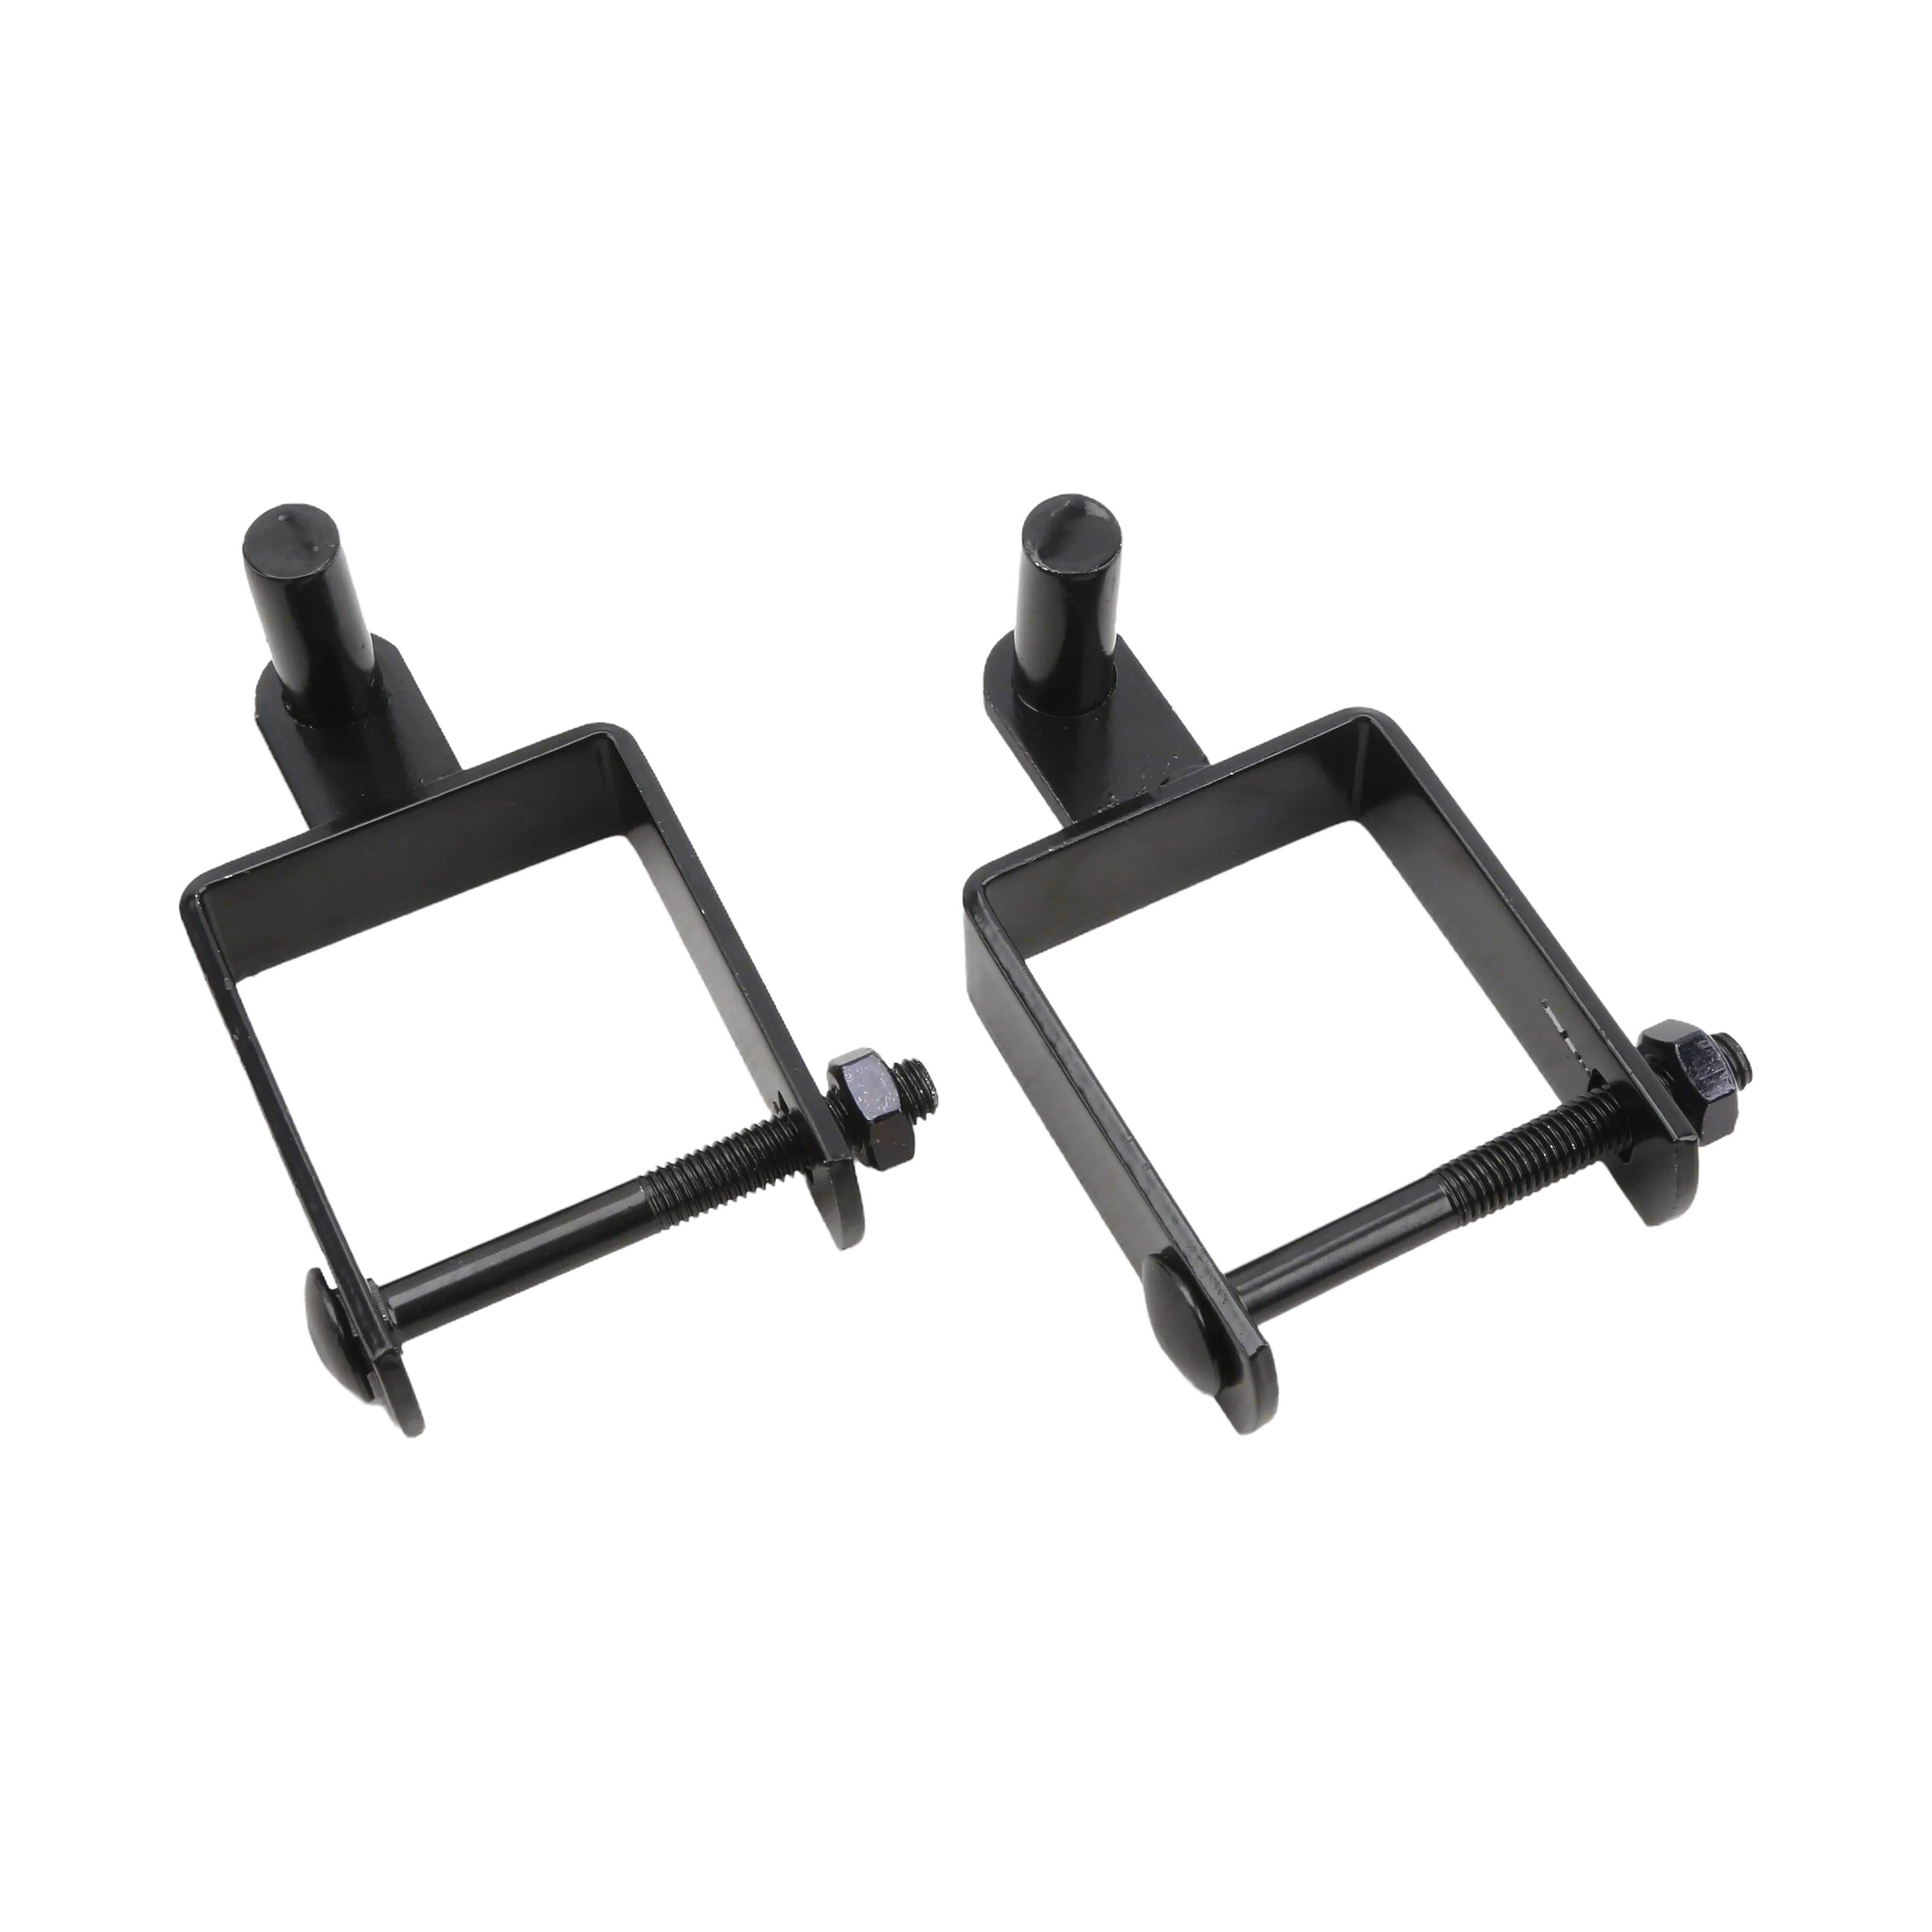 2 1/2 x 2 1/2 Square Male Black Hinge Pair With Nut And Bolt Assembly (5/8 Pintle)